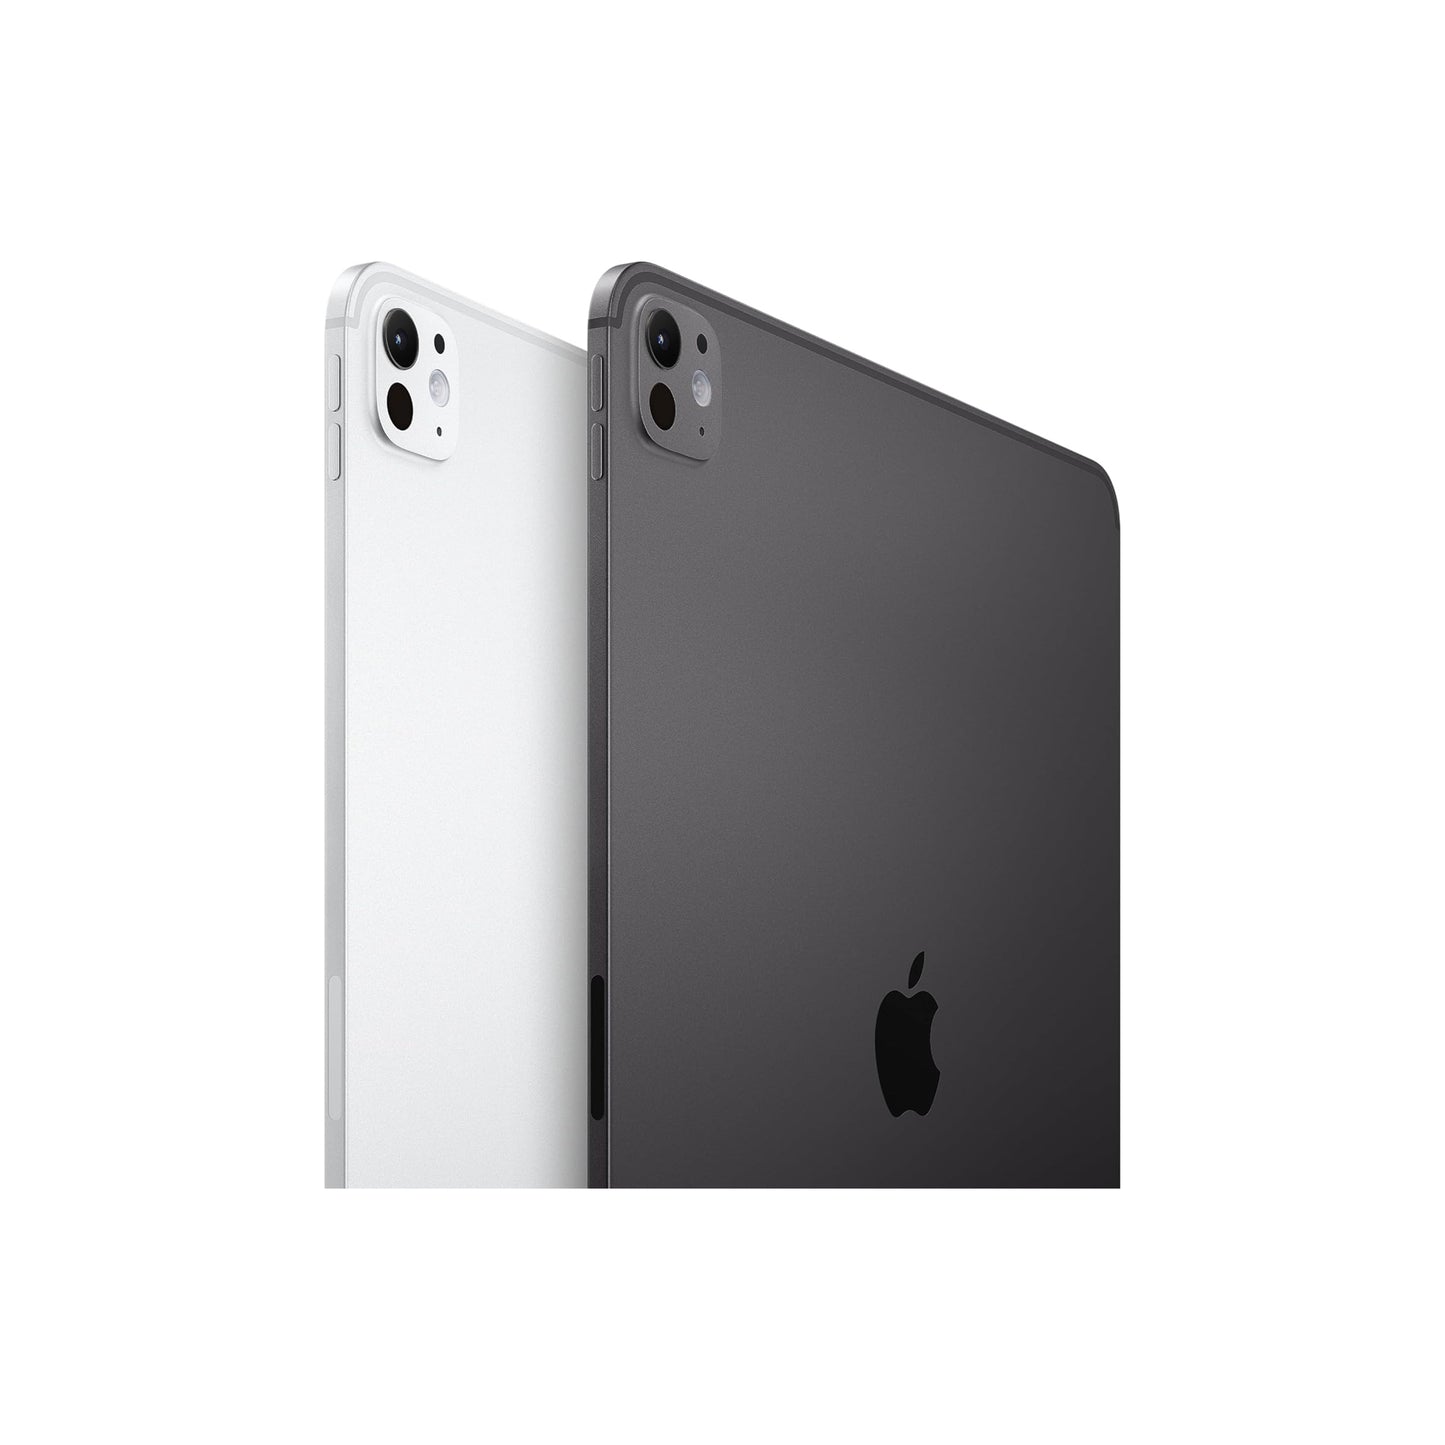 Apple iPad Pro 11-Inch (M4): Ultra Retina XDR Display, 2TB, Landscape 12MP Front Camera/12MP Back Camera, LiDAR Scanner, Wi-Fi 6E + 5G Cellular with eSIM, Face ID, All-Day Battery Life — Silver